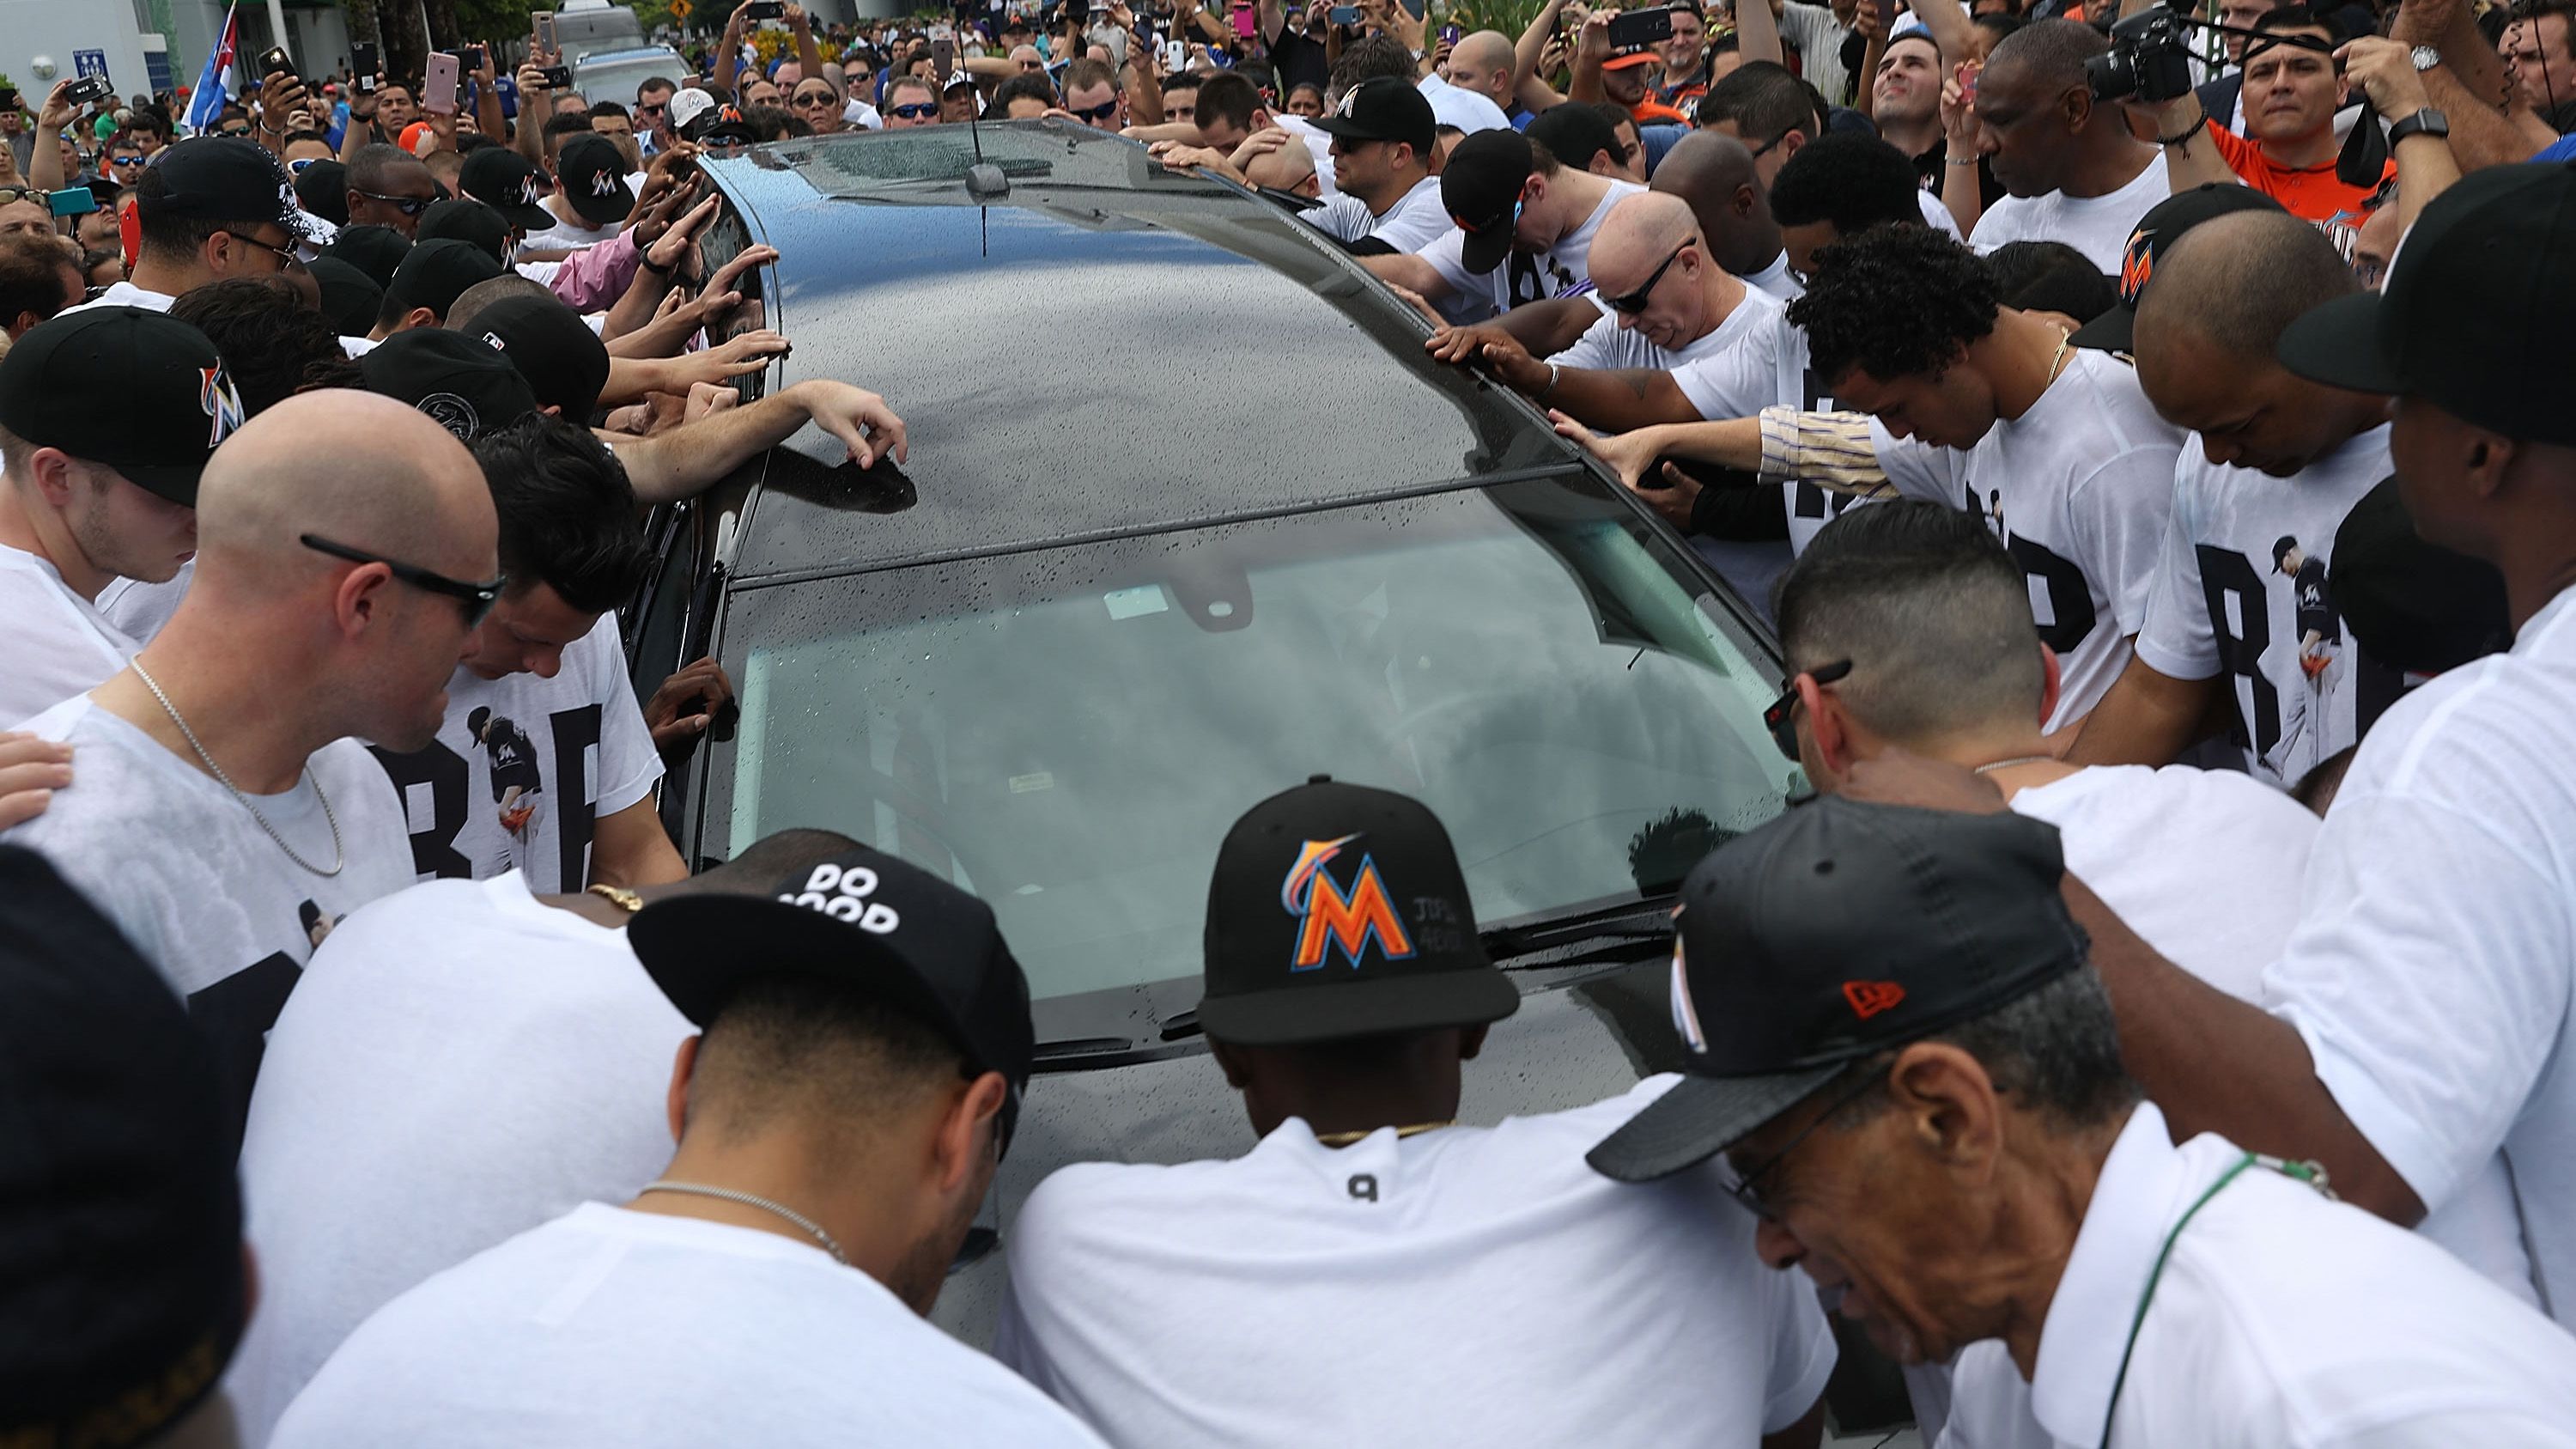 Marlins will honor Jose Fernandez with No. 16 jerseys on Monday